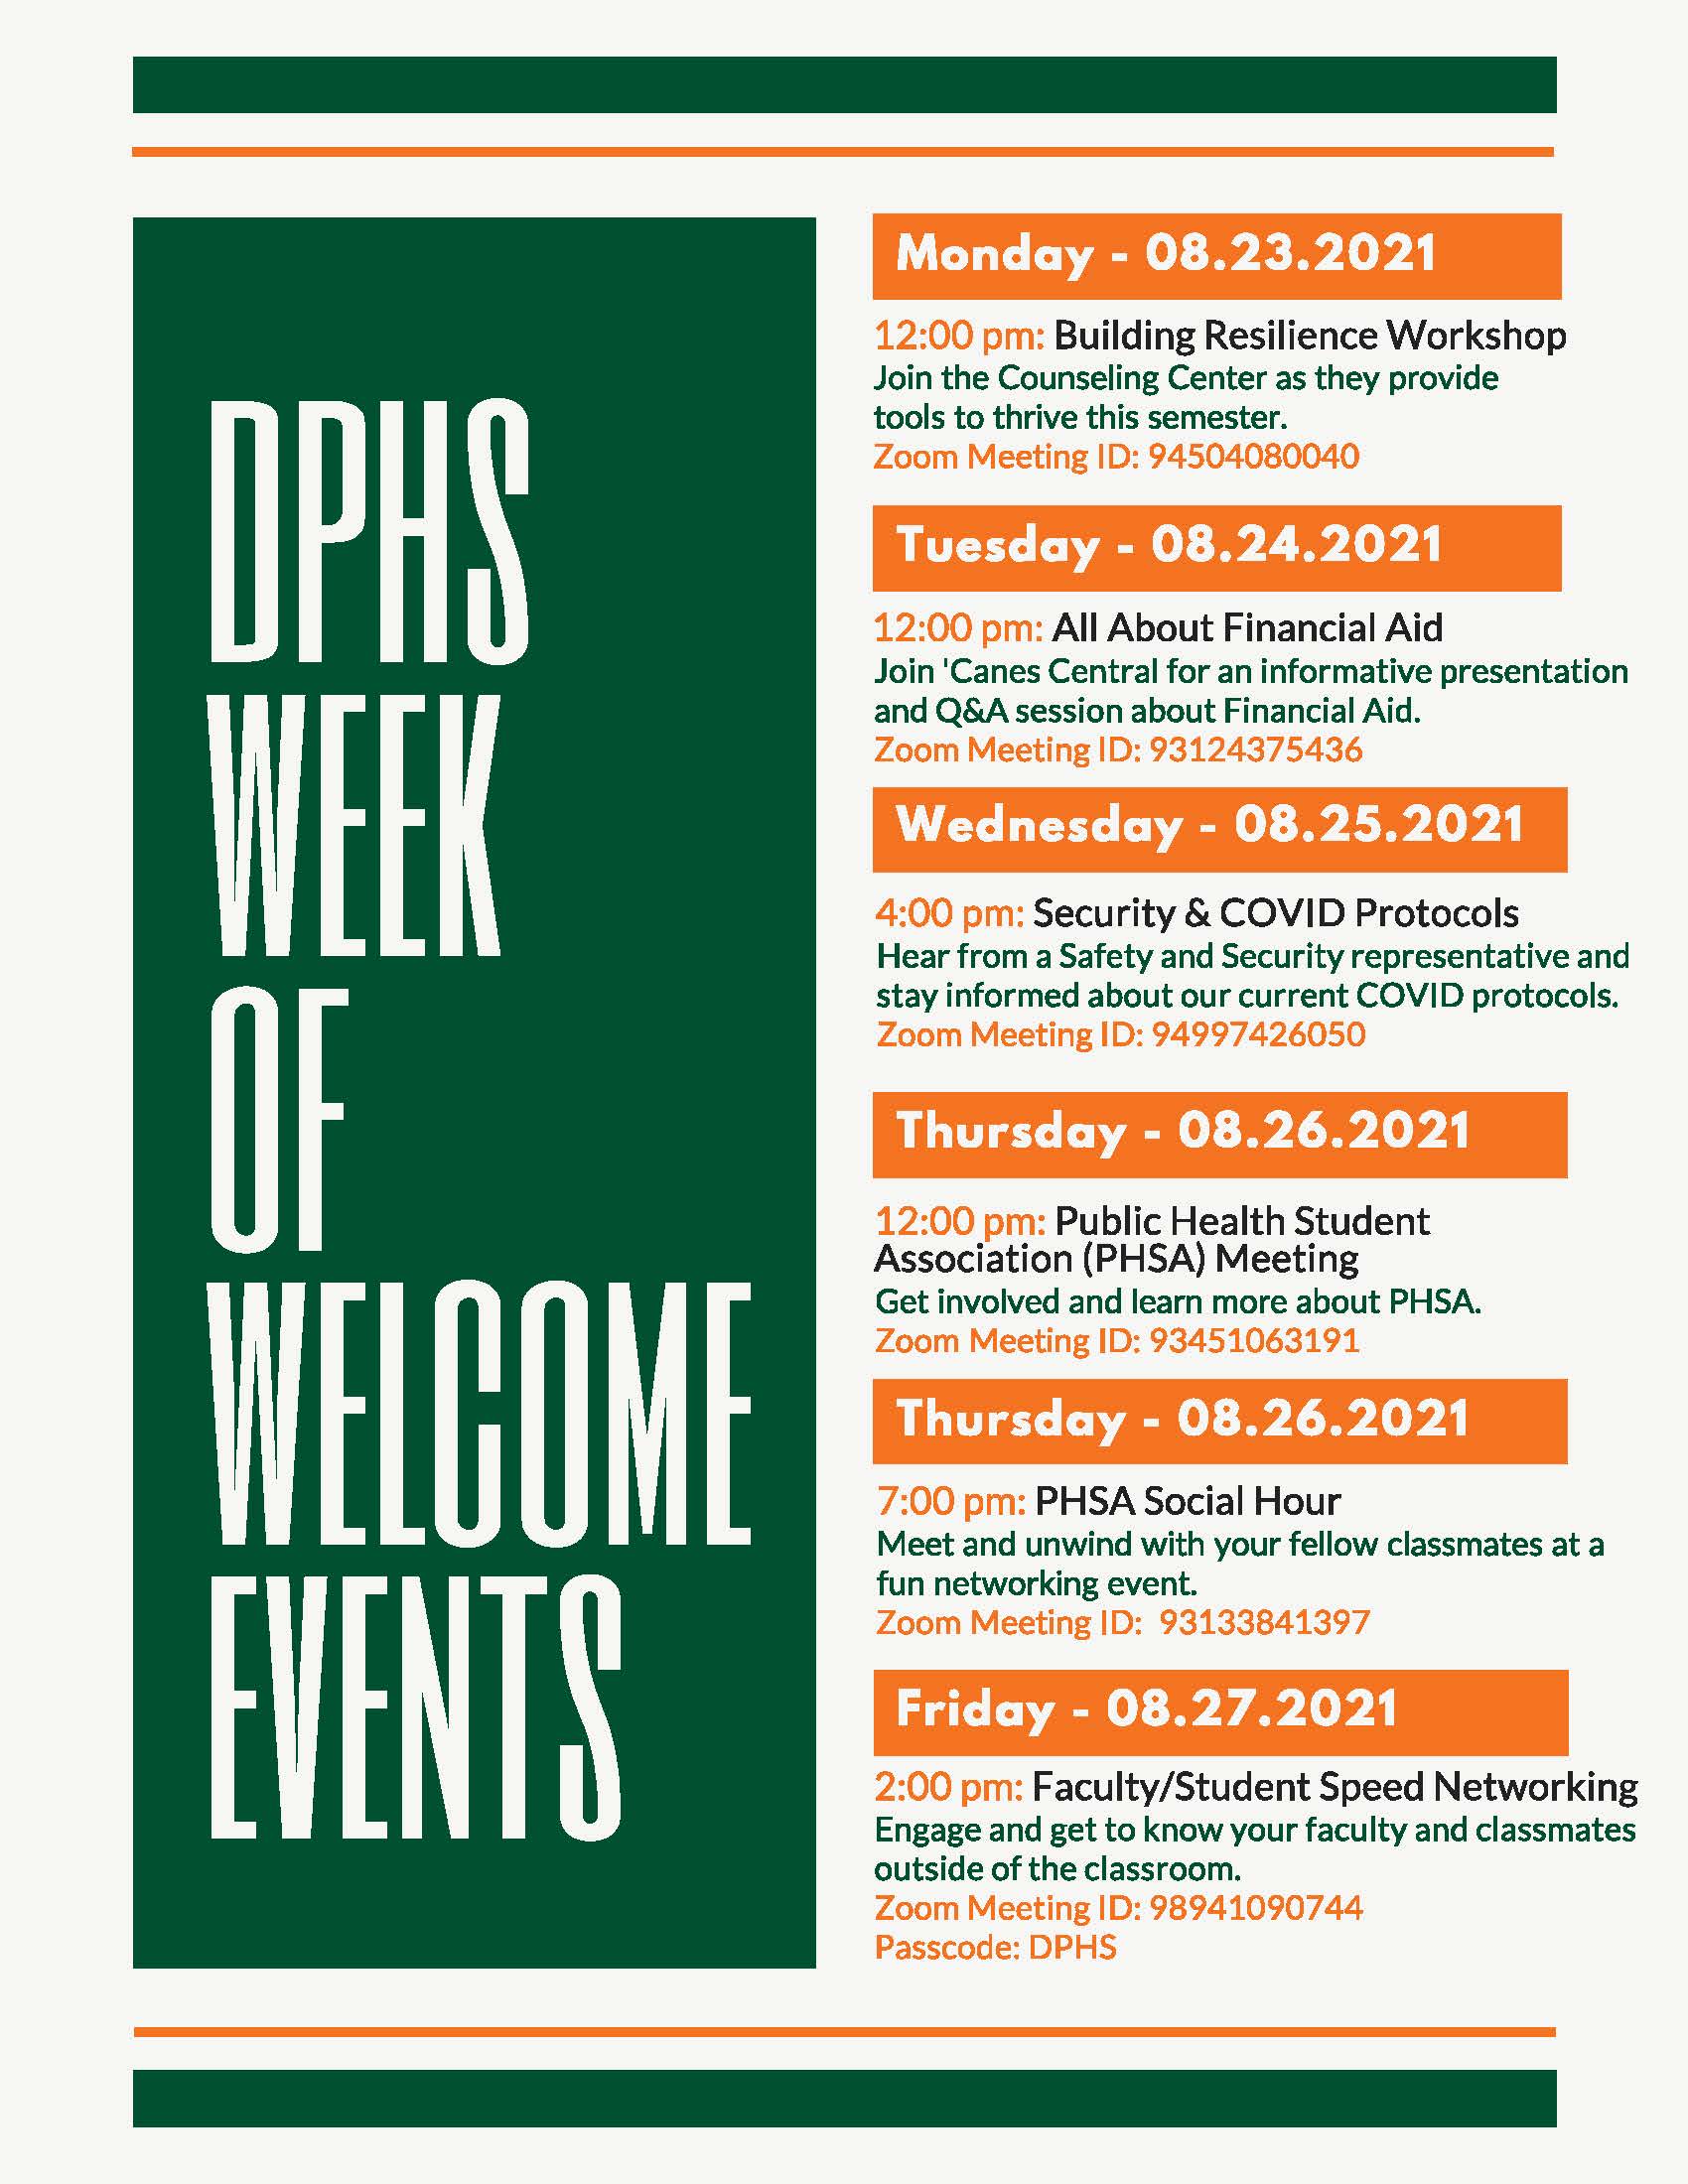 DPHS Week of Welcome Events